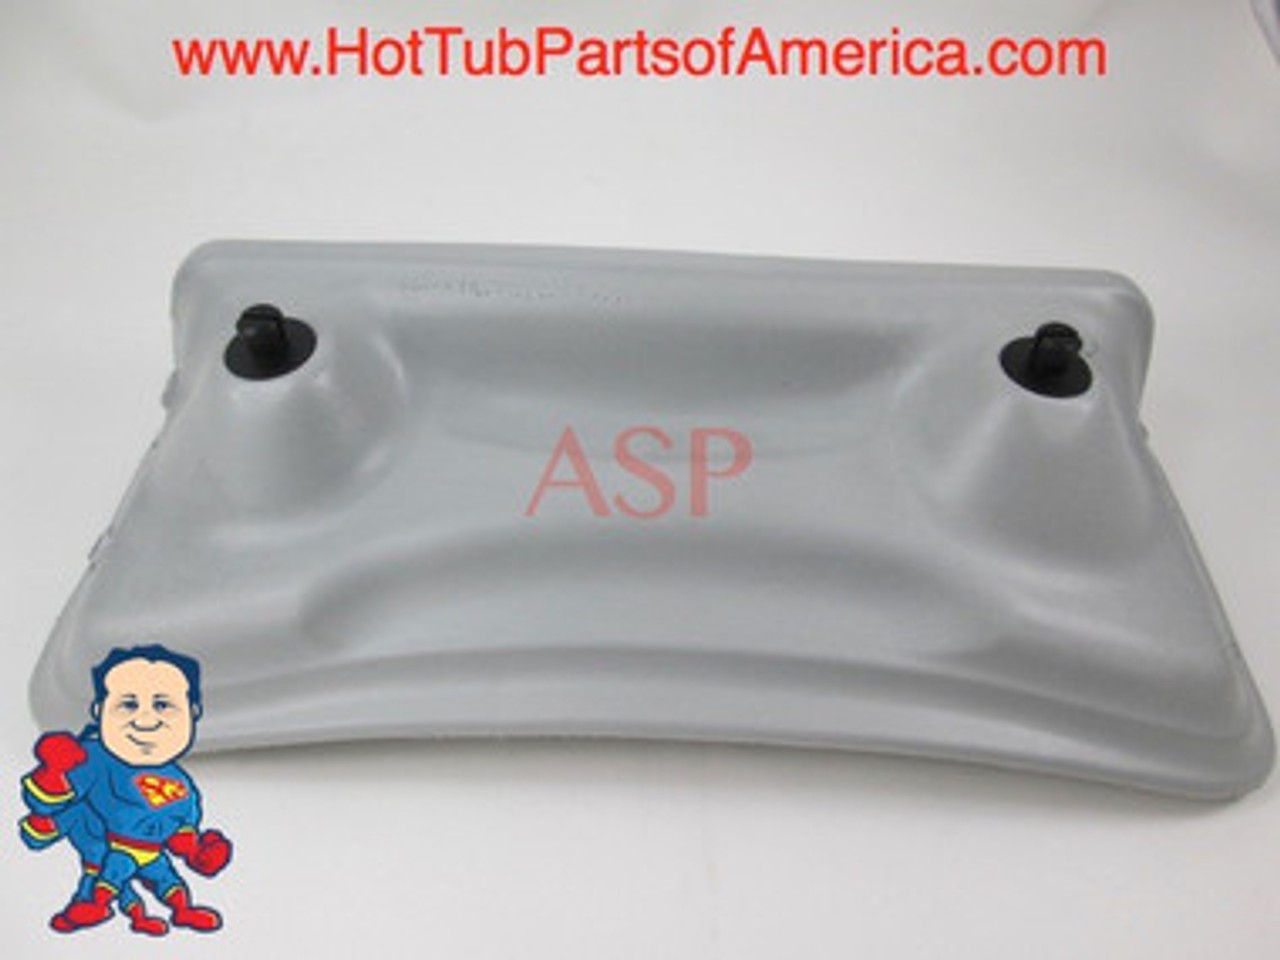 Artesian Resort Spa Hot Tub Neck Pillow Gray Dual Pin Head Rest How To Video